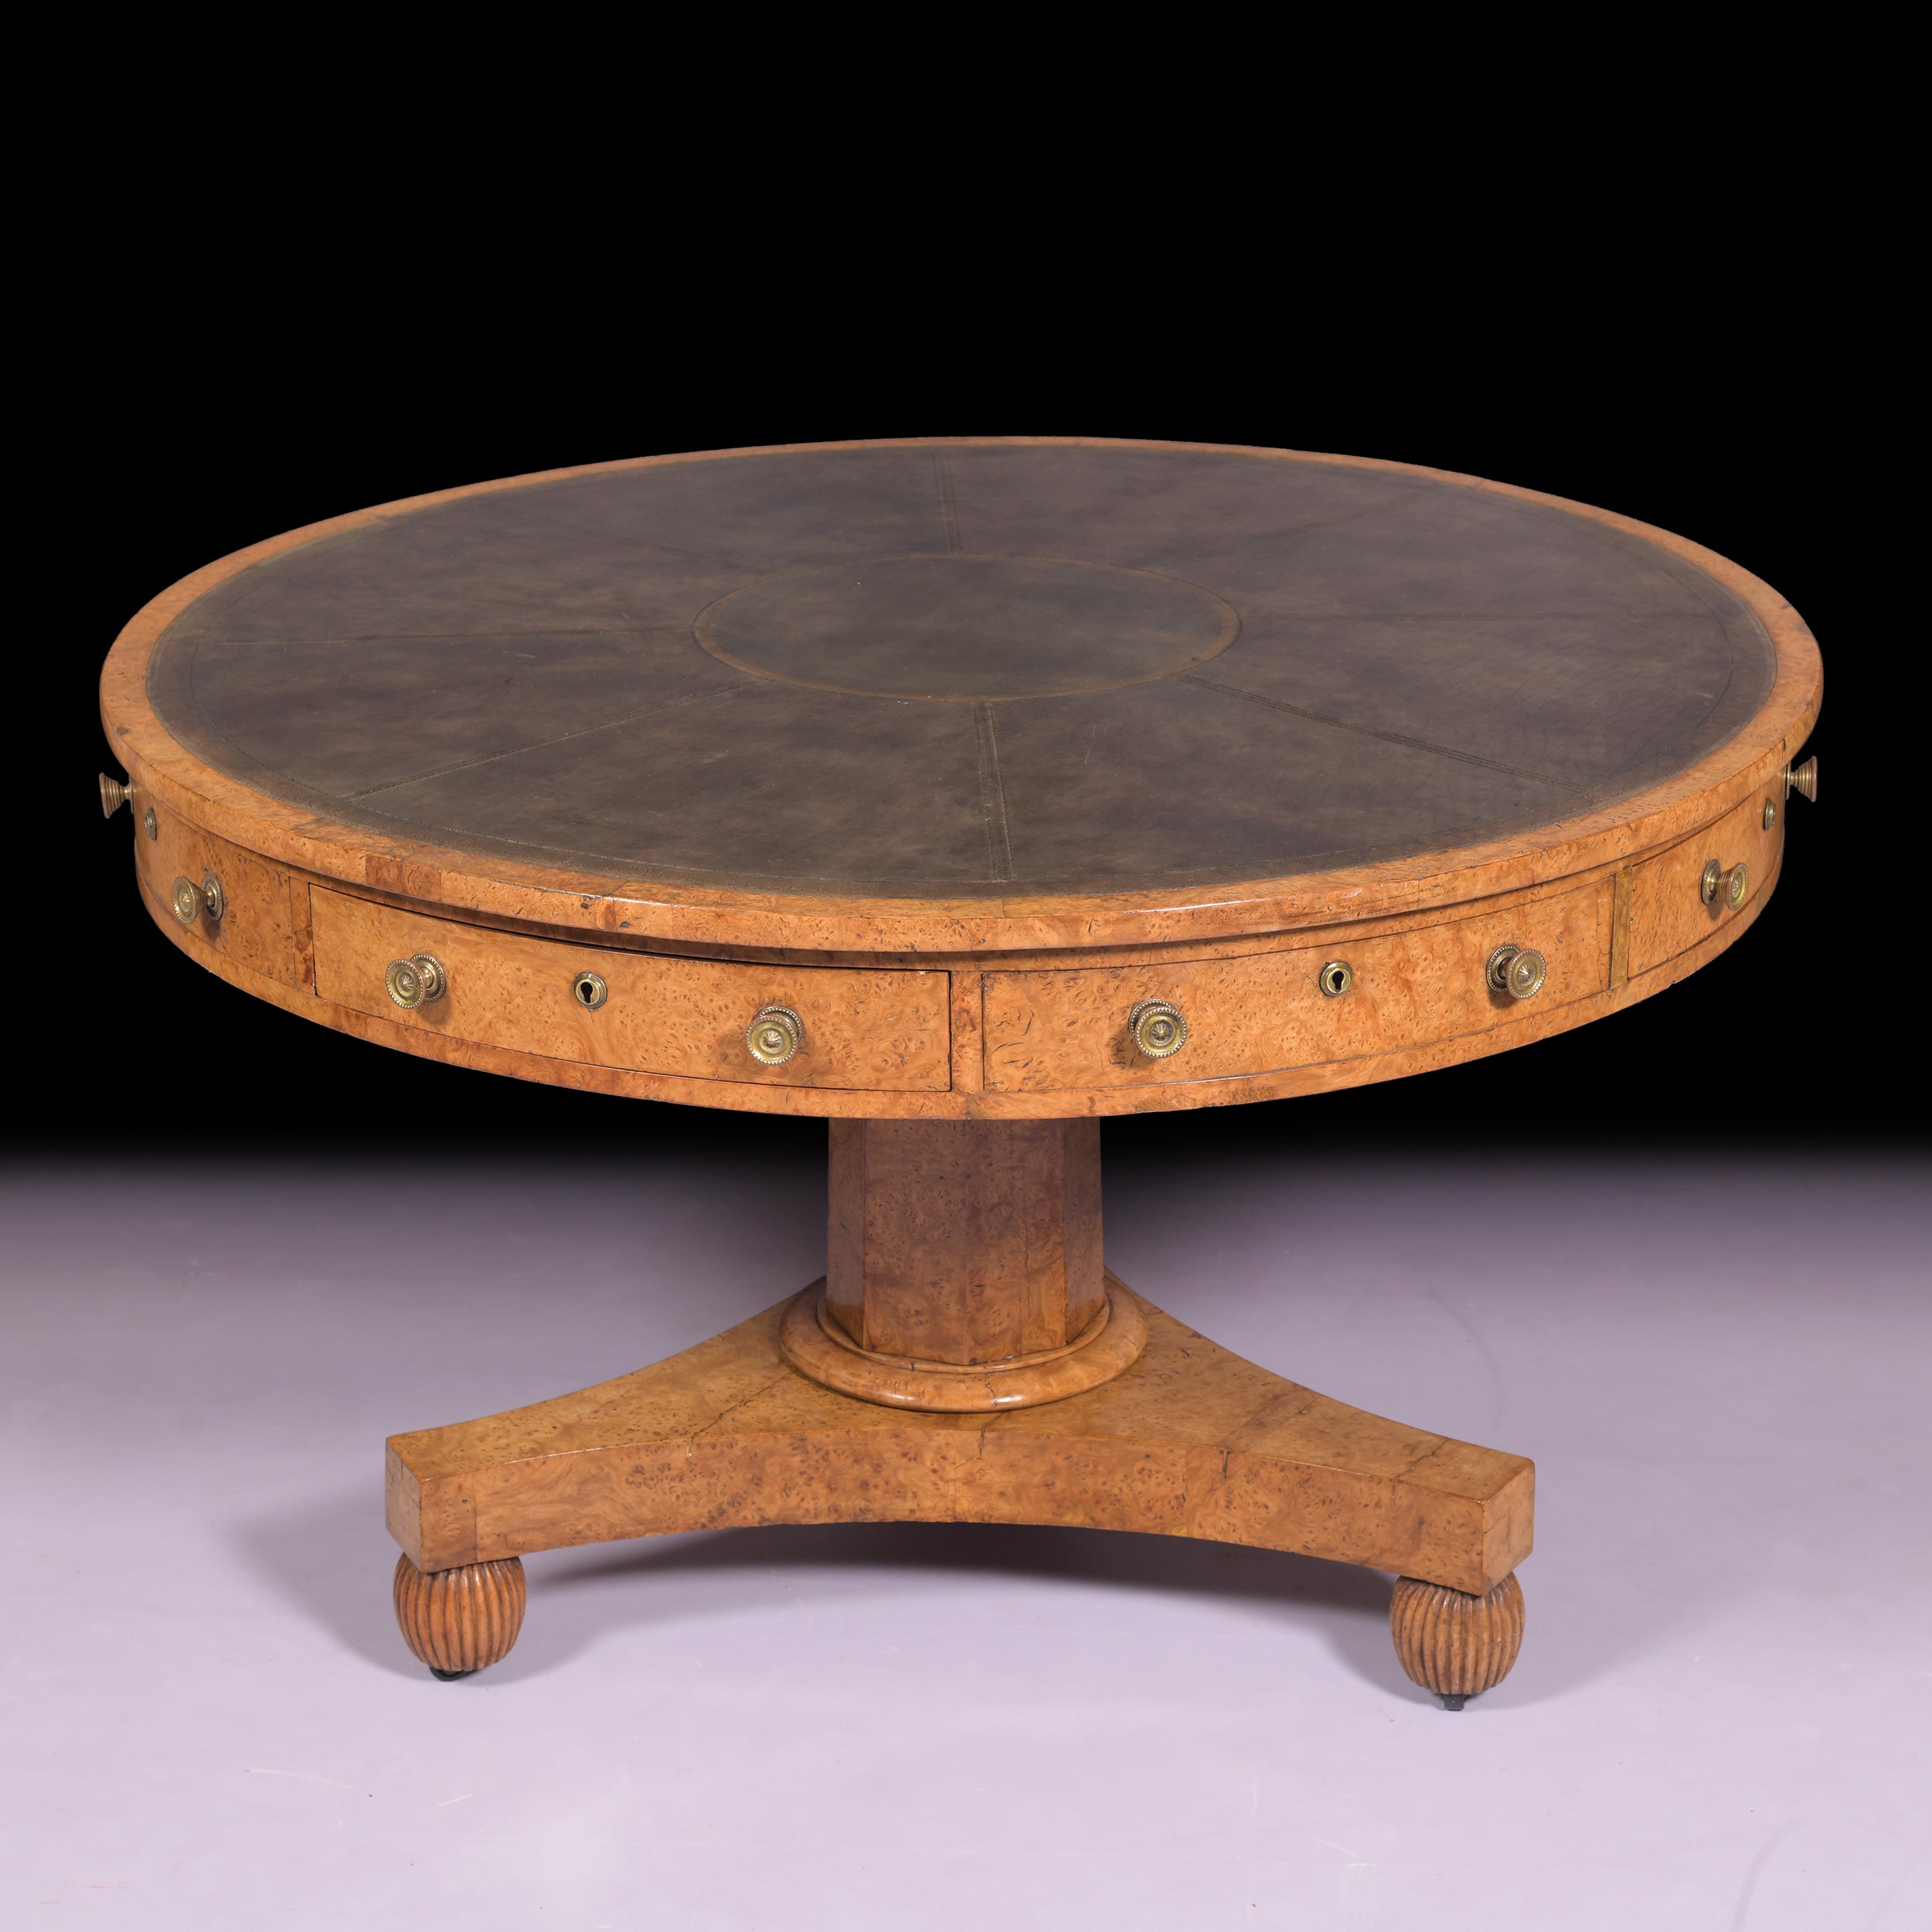 REGENCY CENTRE TABLE ATTRIBUTED TO GILLOWS - REF No. 7059